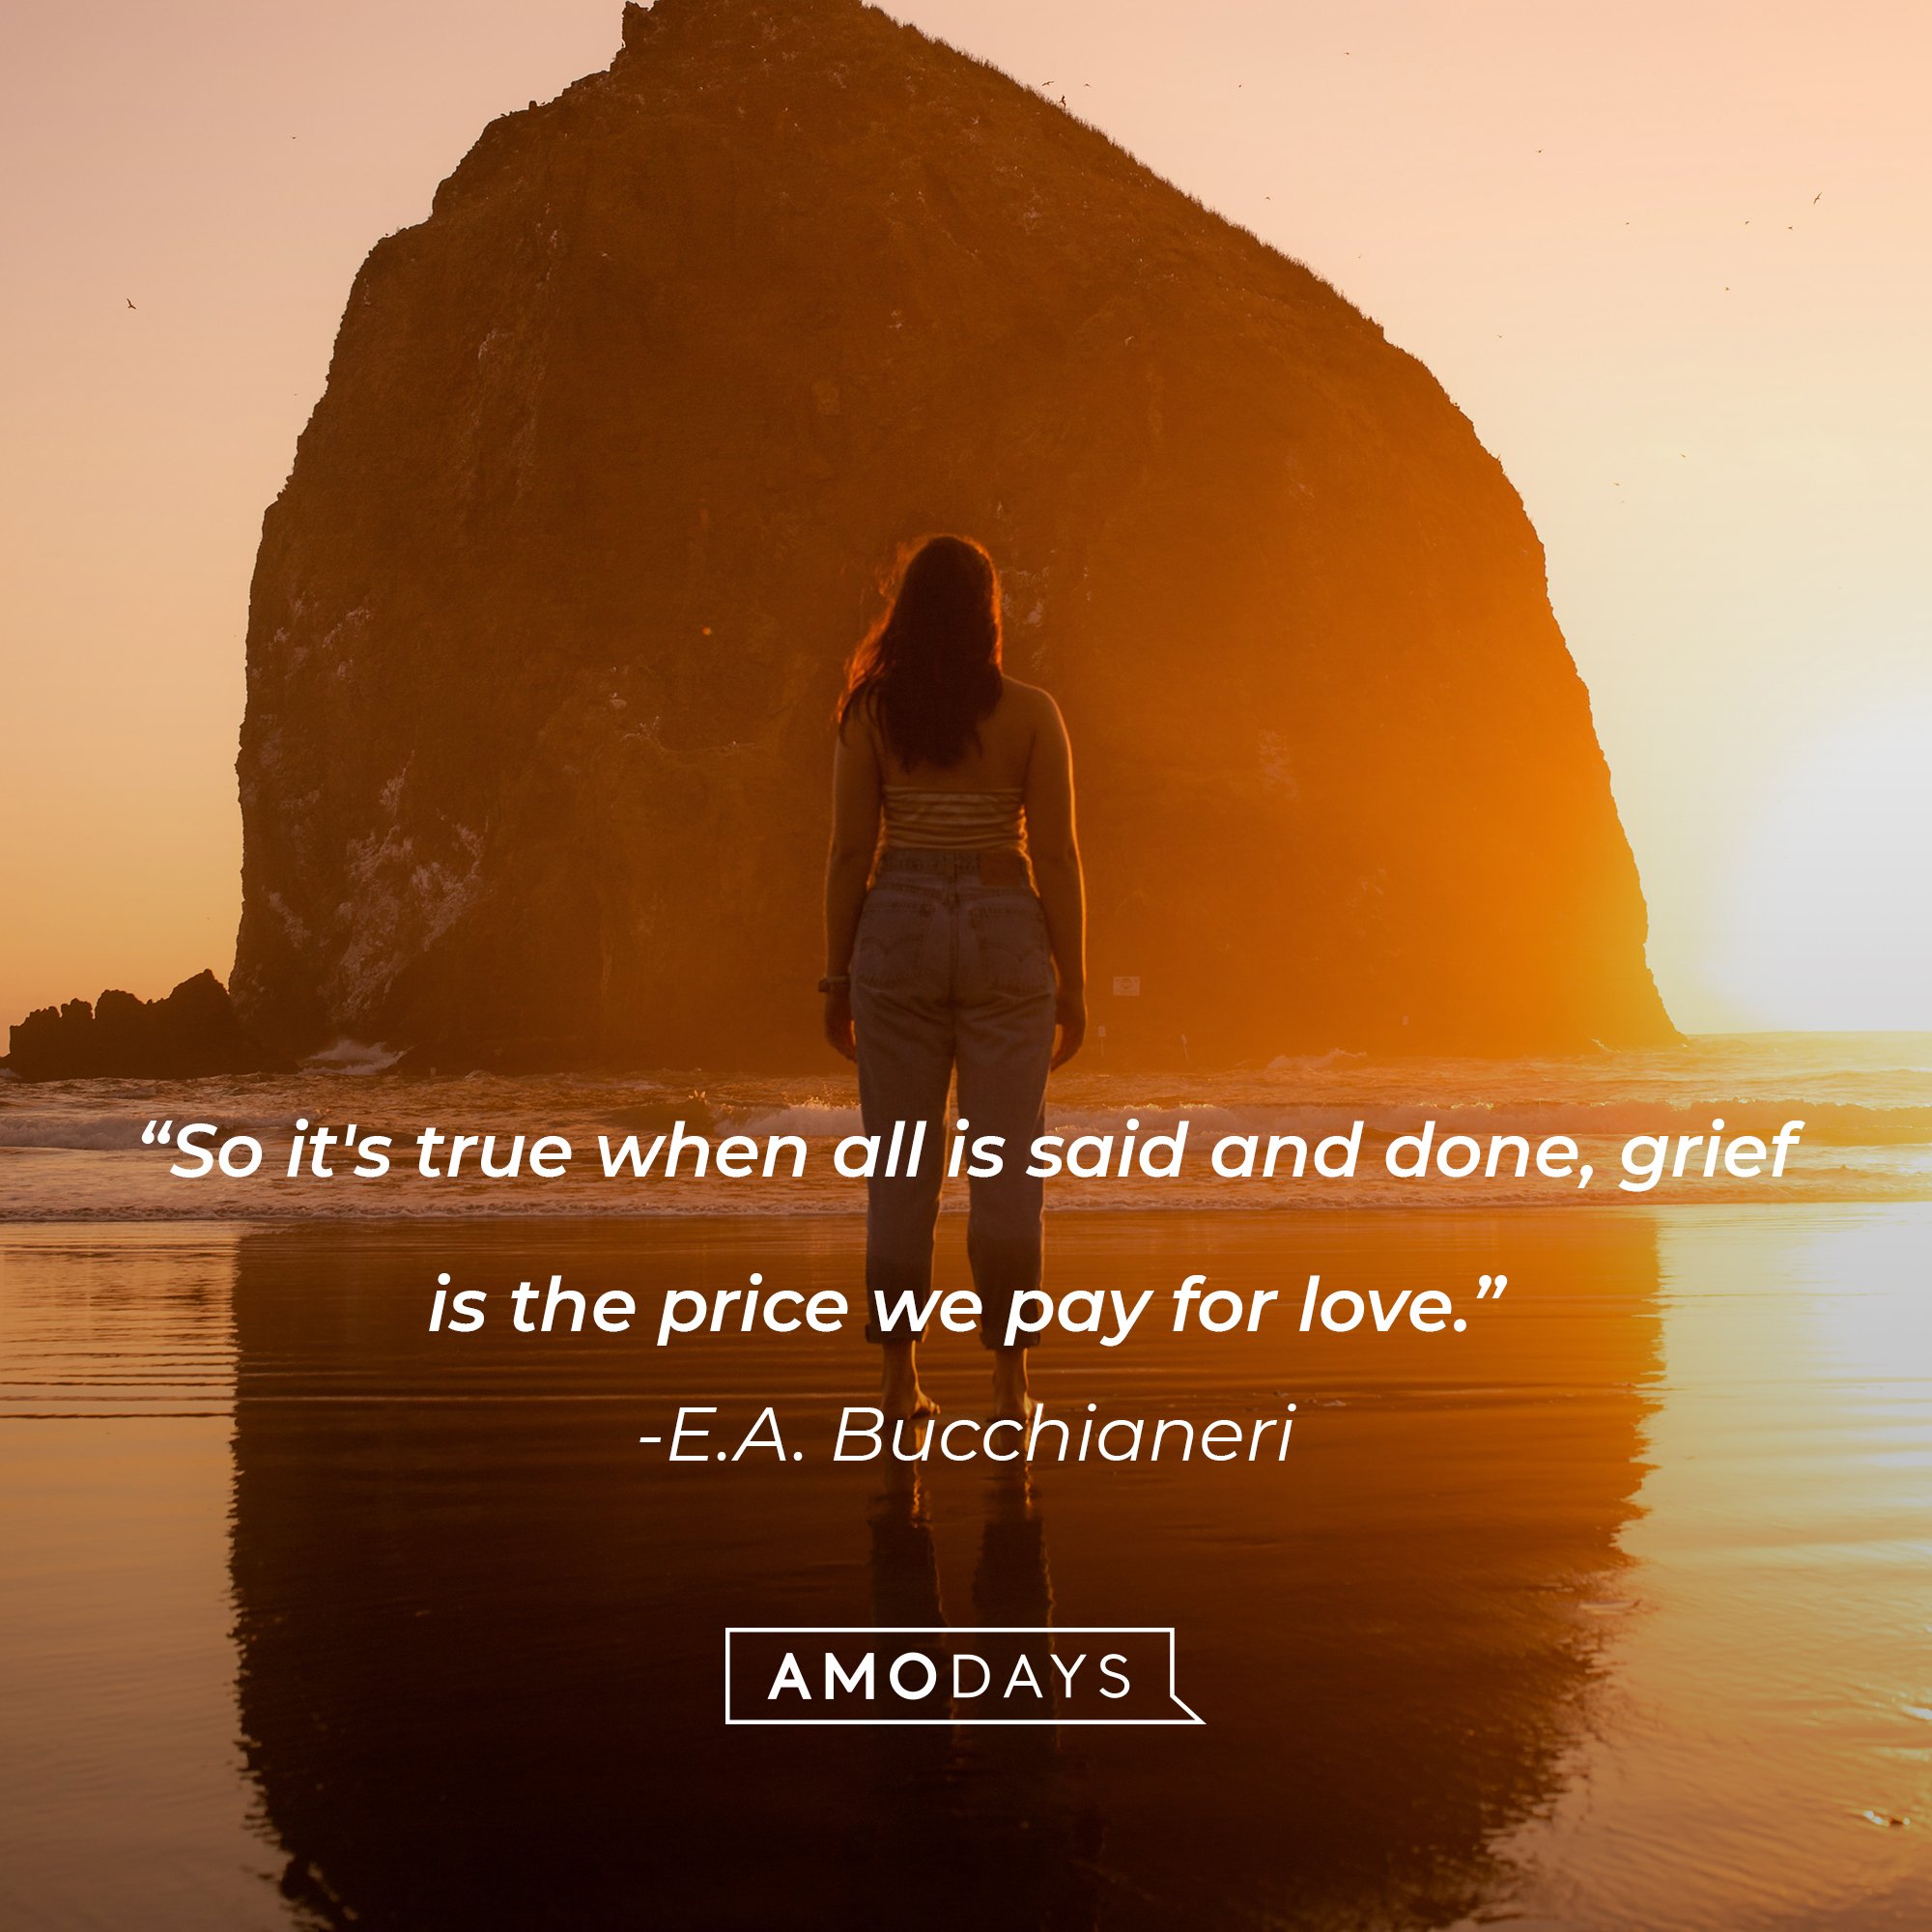 E.A. Bucchianeri’s quote: "So it's true when all is said and done, grief is the price we pay for love." | Image: AmoDays